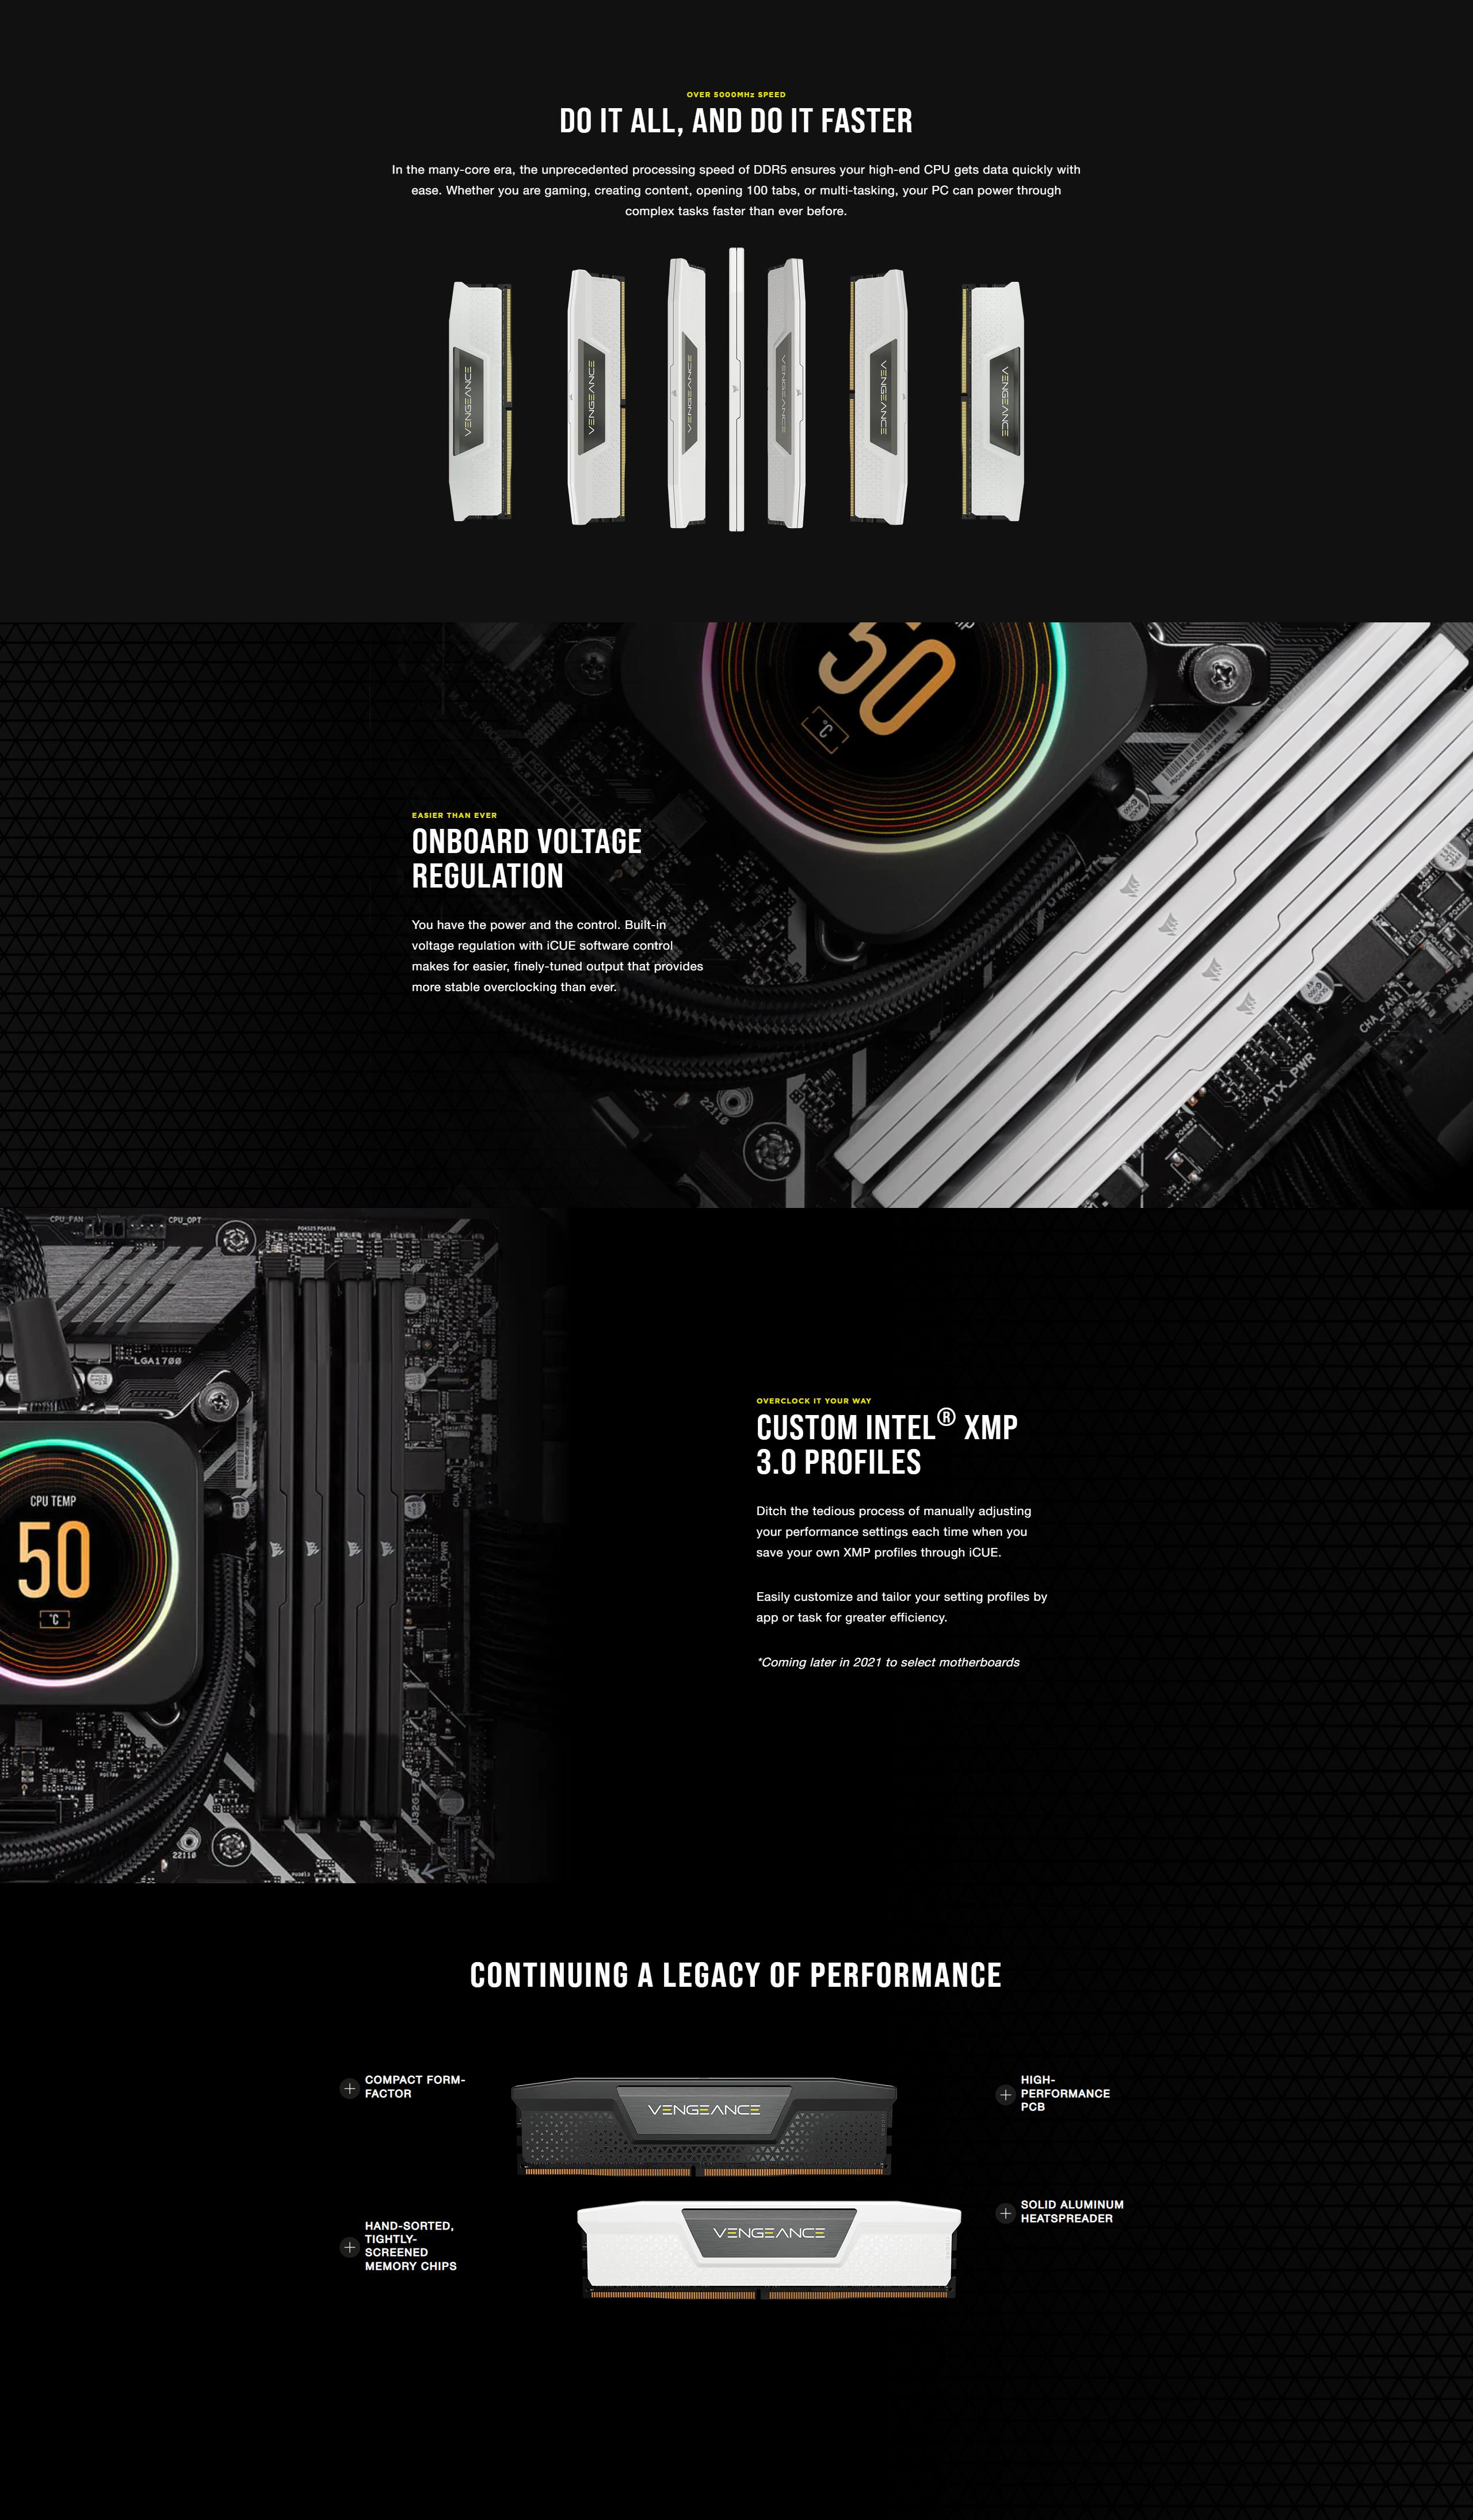 A large marketing image providing additional information about the product Corsair 32GB Kit (2x16GB) DDR5 Vengeance 6000Mhz C36 - Black - Additional alt info not provided